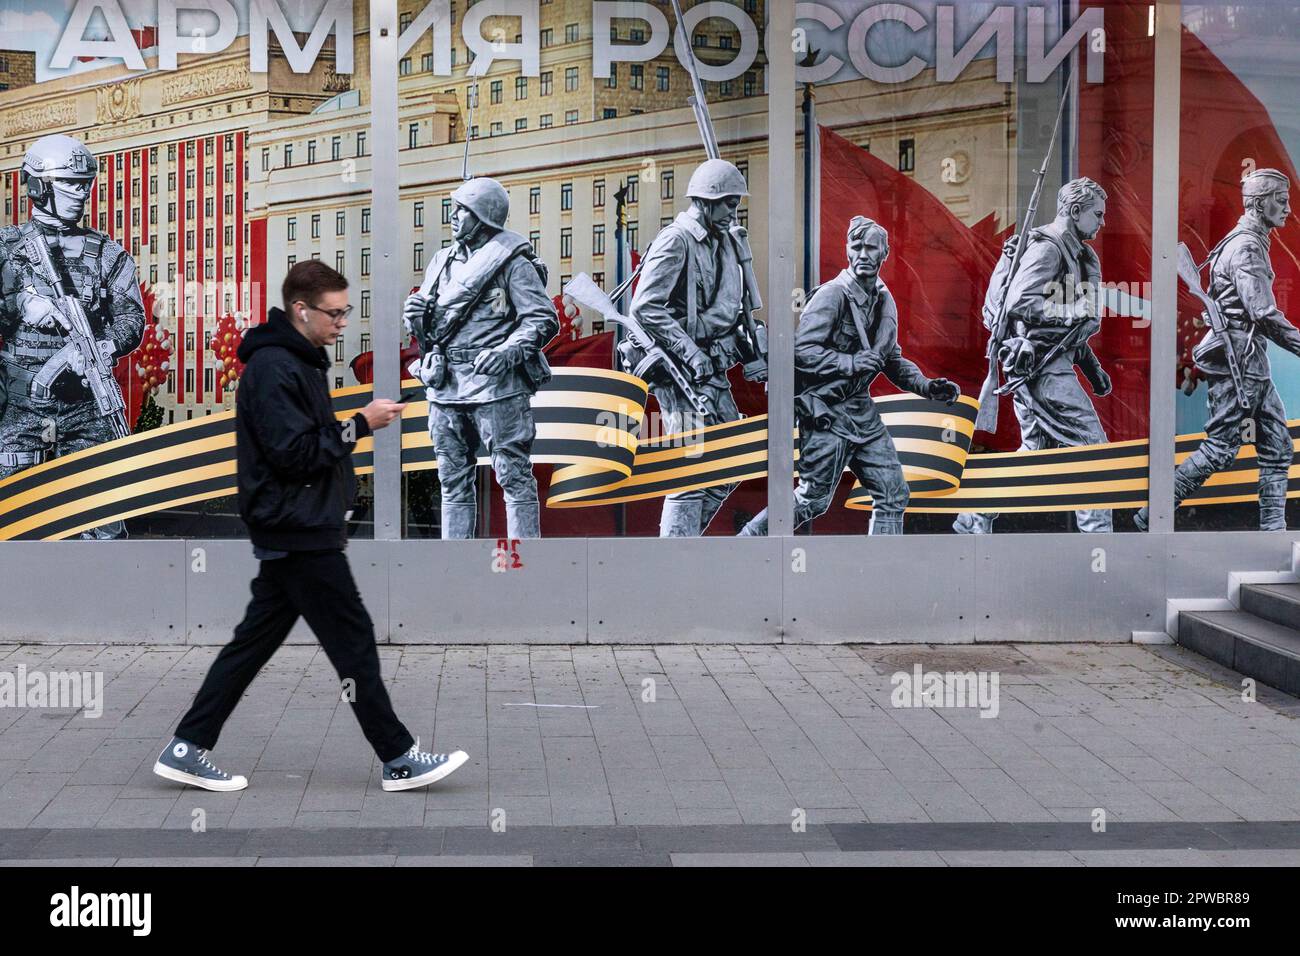 Moscow, Russia. 29th of April, 2023  A man walks past the Army of Russia store with a festive banner for Victory Day celebration in the shop window in central Moscow, Russia. The banner reads 'Army of Russia!' Stock Photo